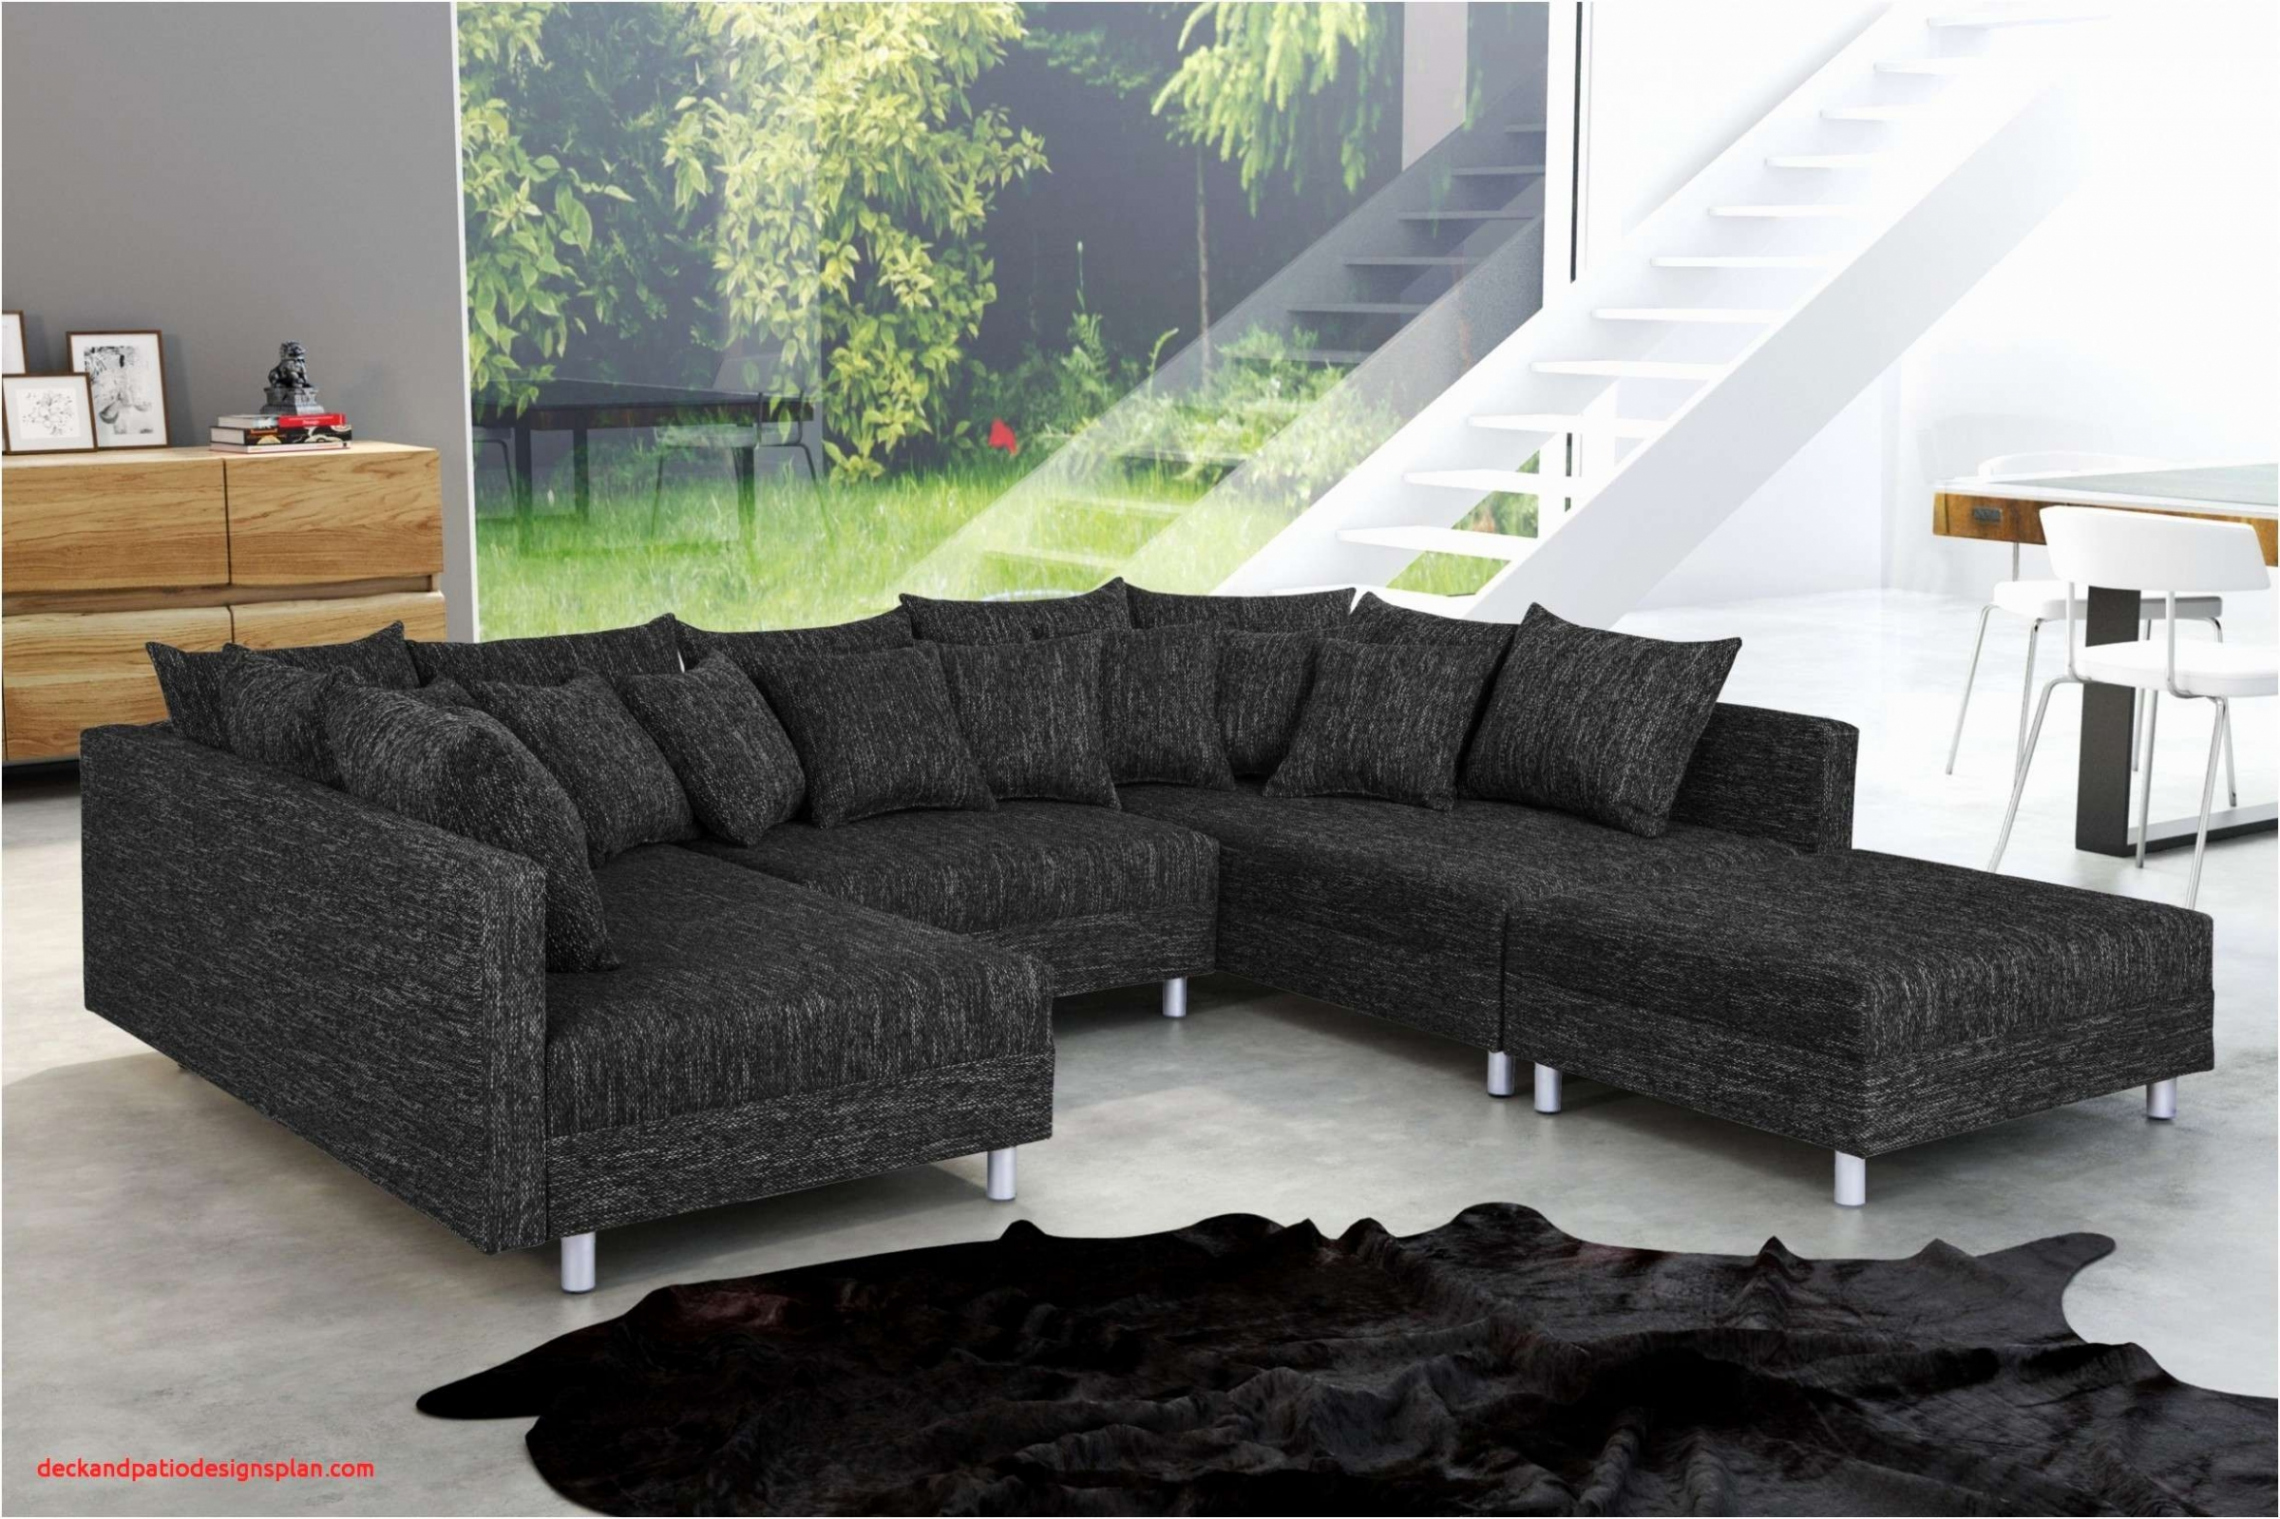 sofa mit beleuchtung yct projekte graue couch dekorieren graue couch dekorieren 1